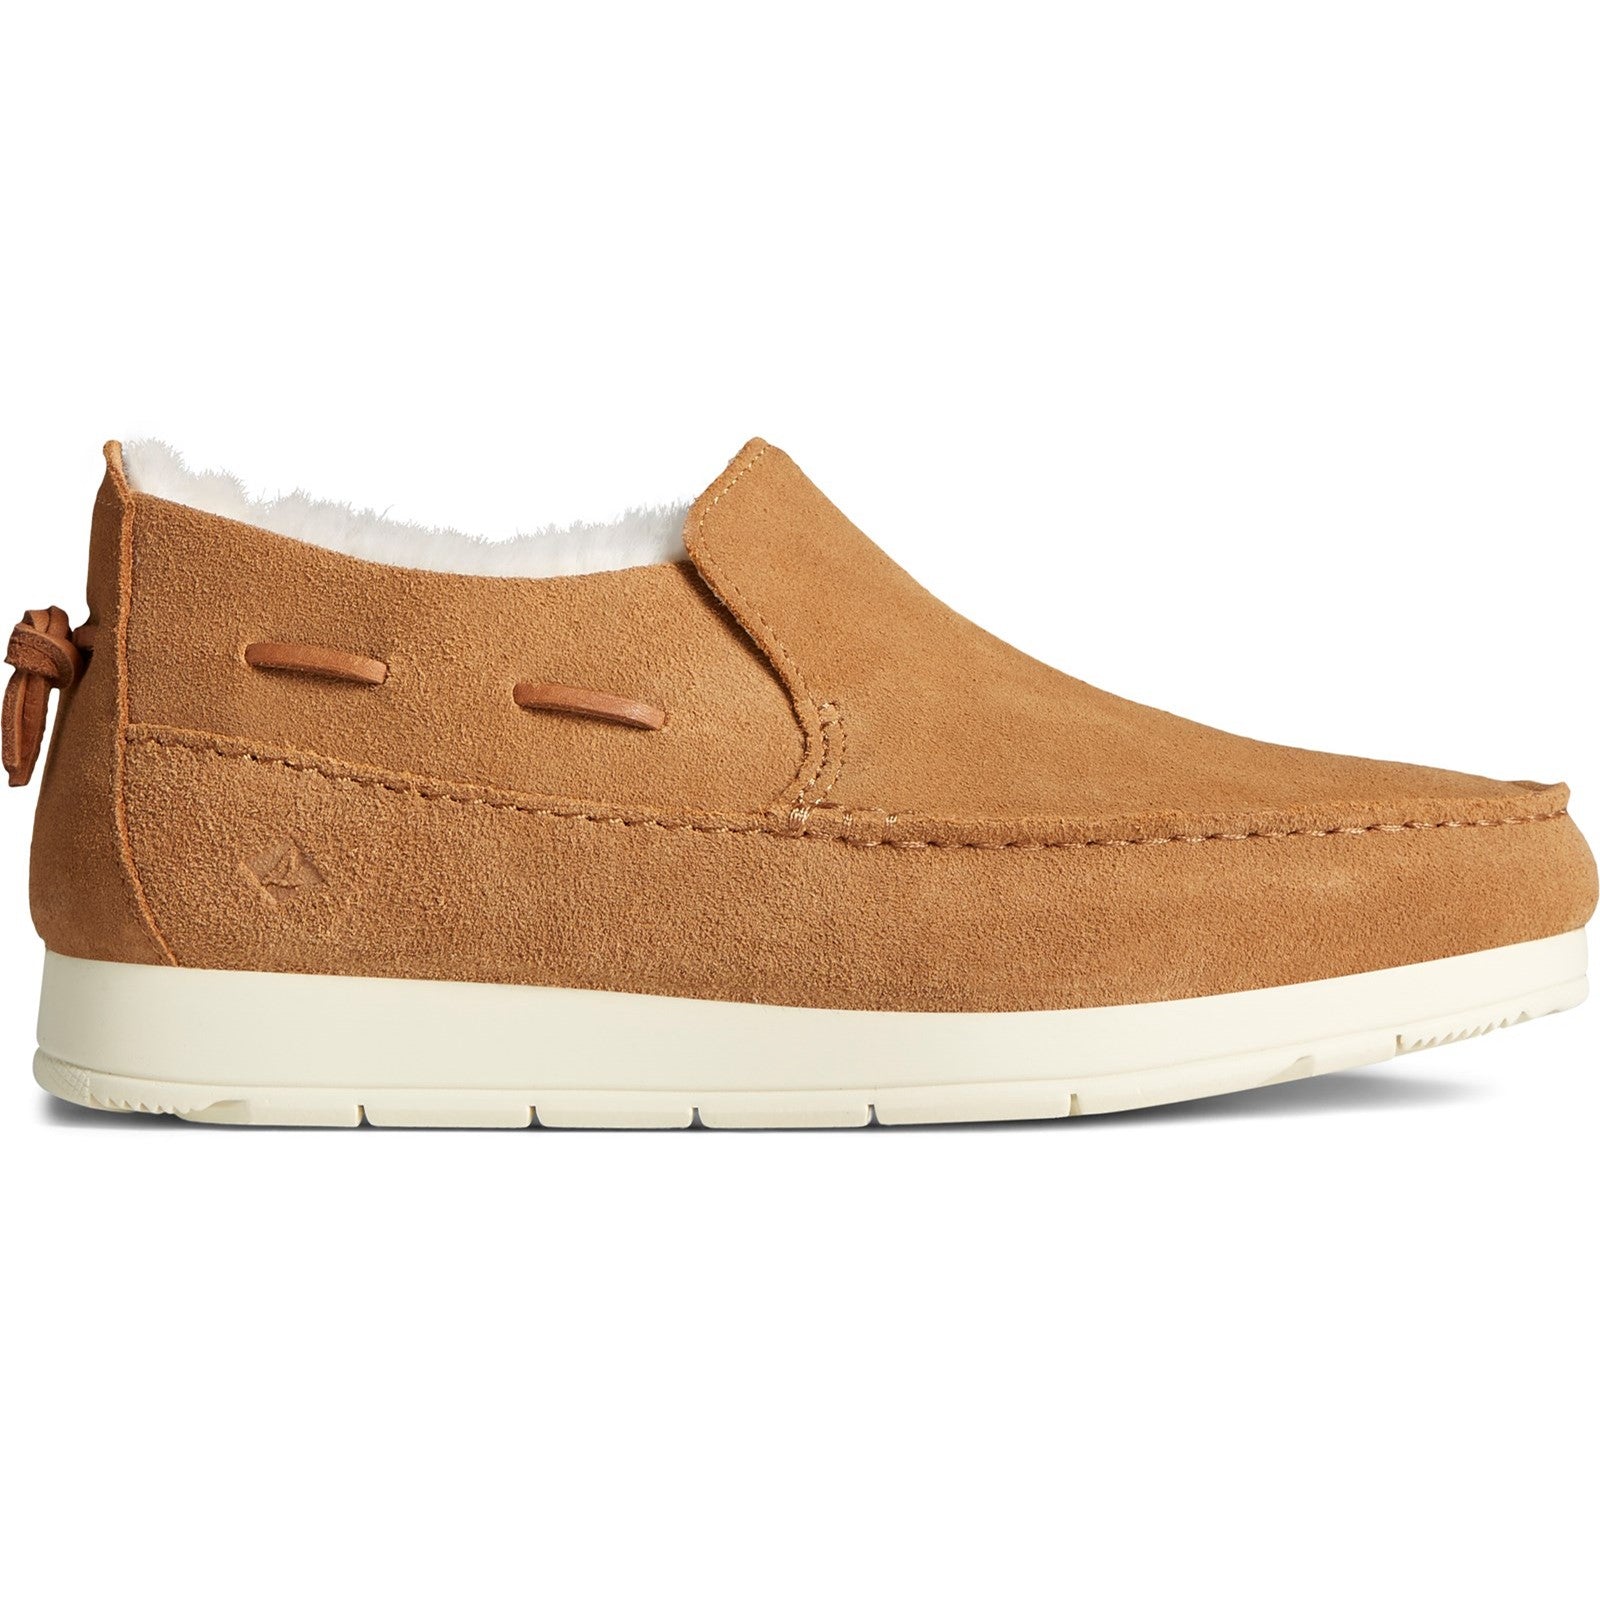 Sperry Womens Moc-Sider Basic Core Slip On Shoes - Tan